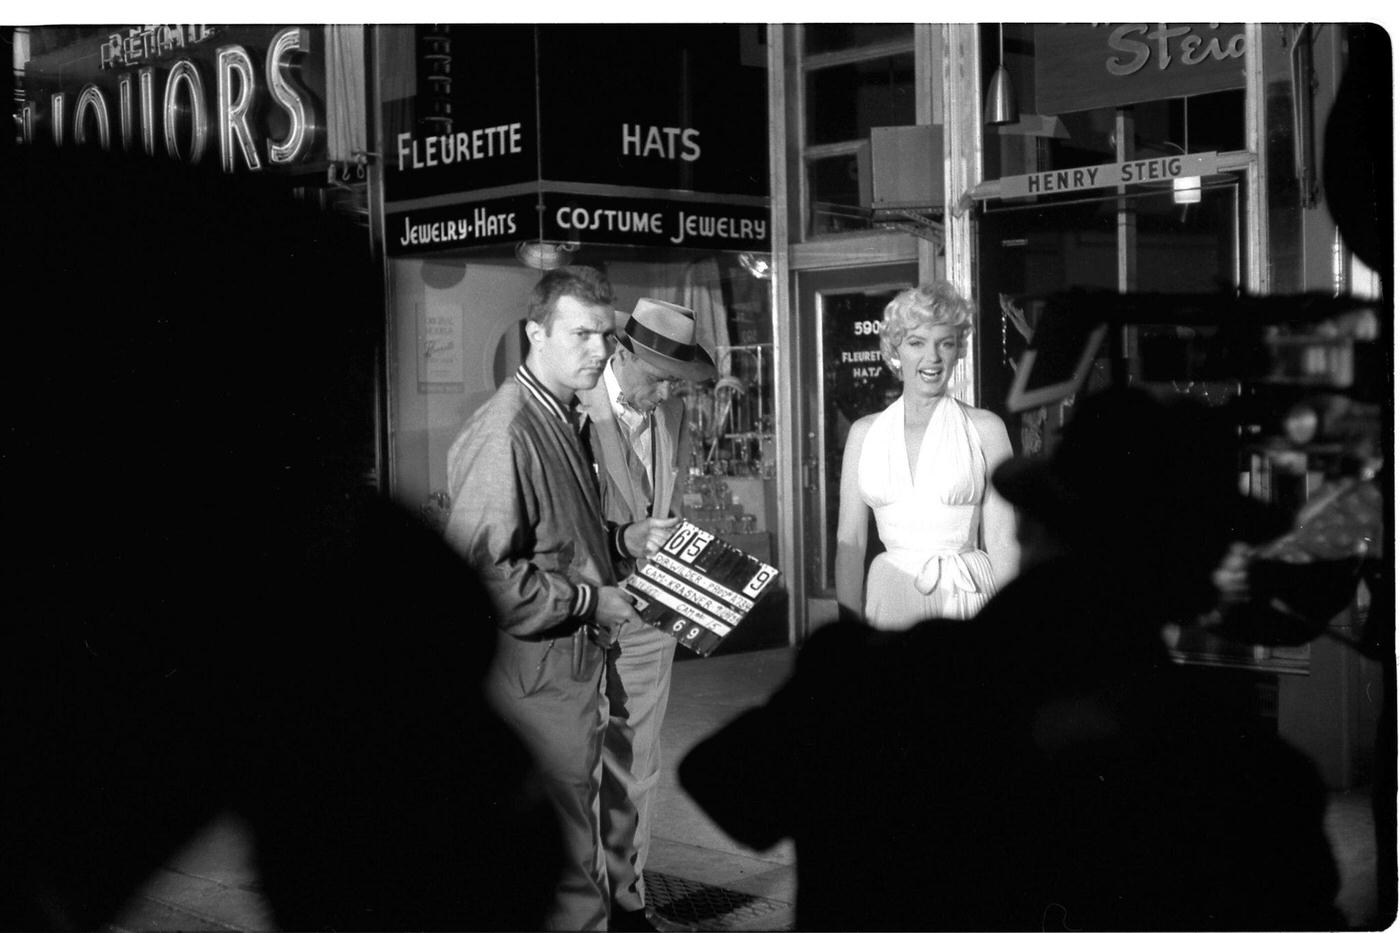 Marilyn Monroe on location (at Lexington Avenue and 52nd Street) during the filming of 'The Seven Year Itch'